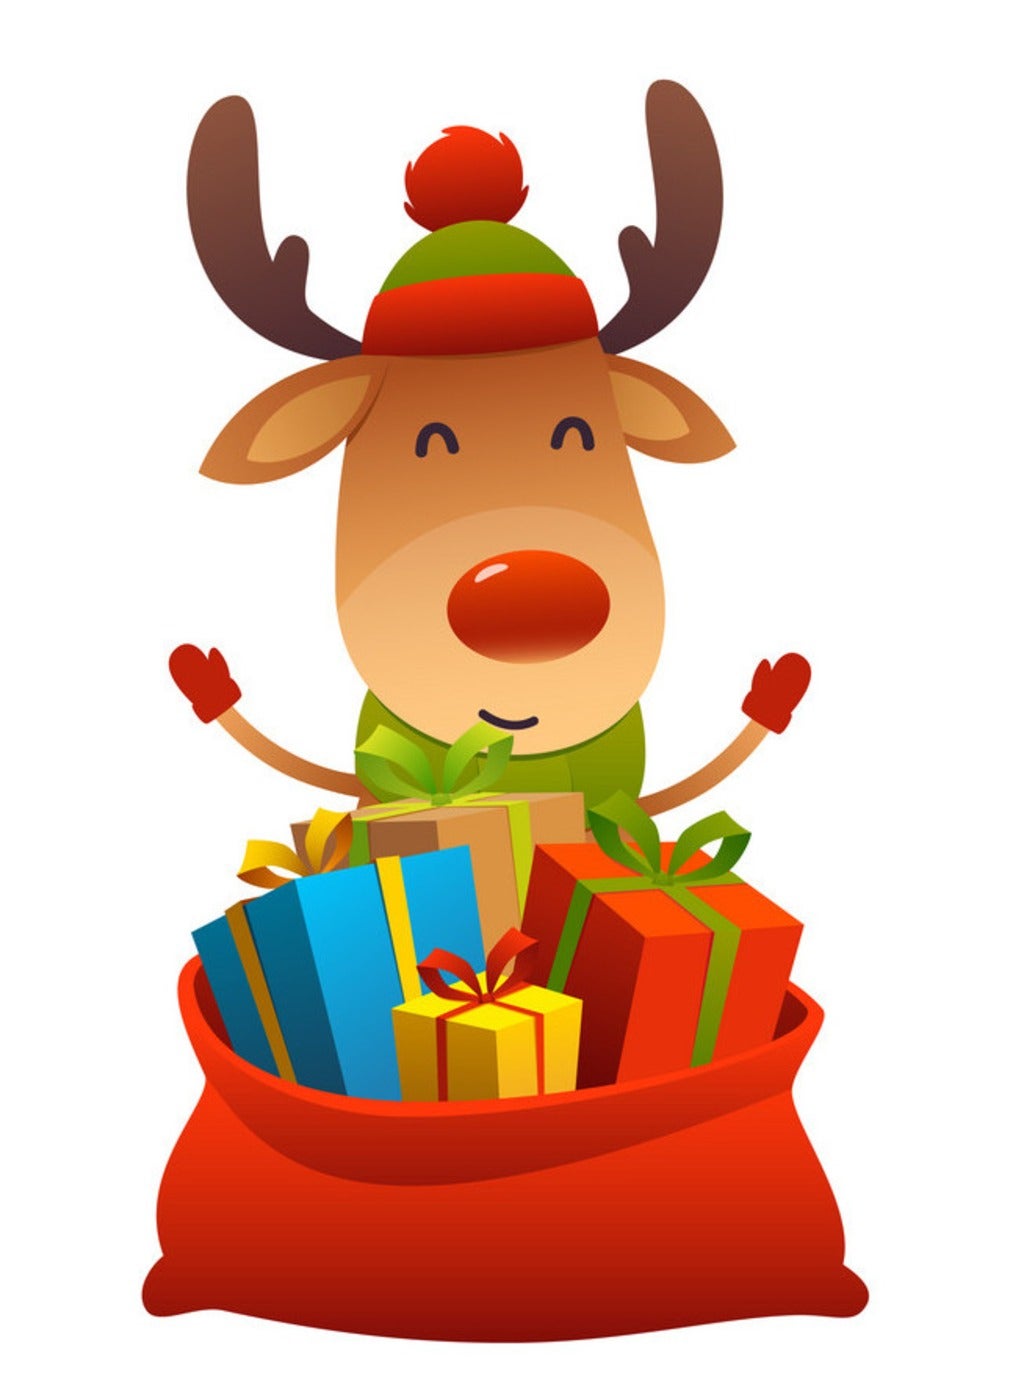 Reindeer with gifts